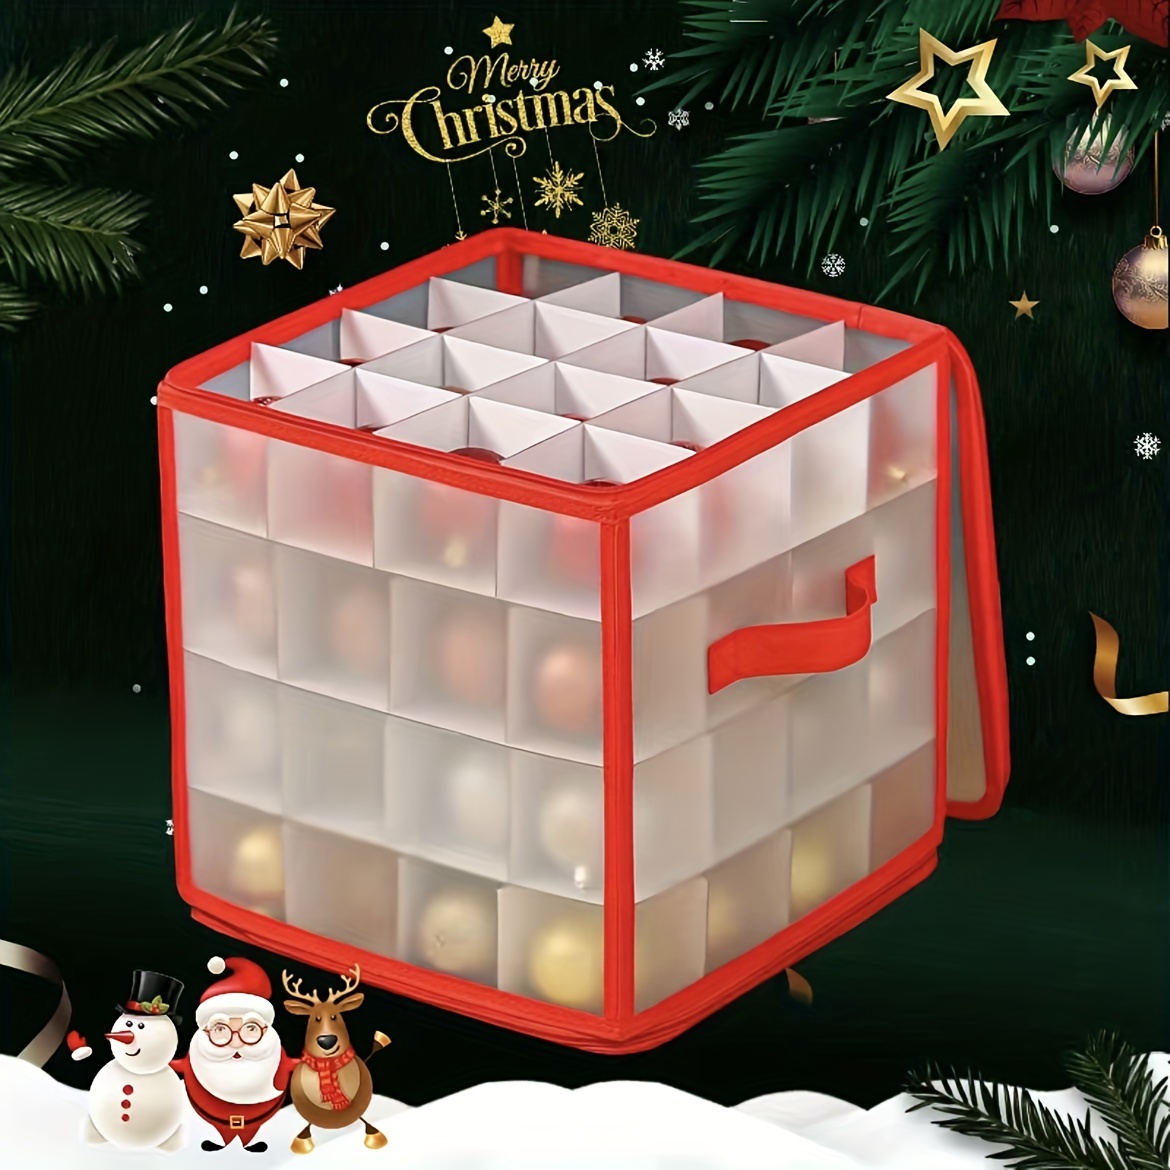 Colour Small Ball Christmas Ornament Storage Box with Lid & Sturdy Handles,  Zipper Closure Storage Cube with Adjustable Dividers Contributes Up to 64